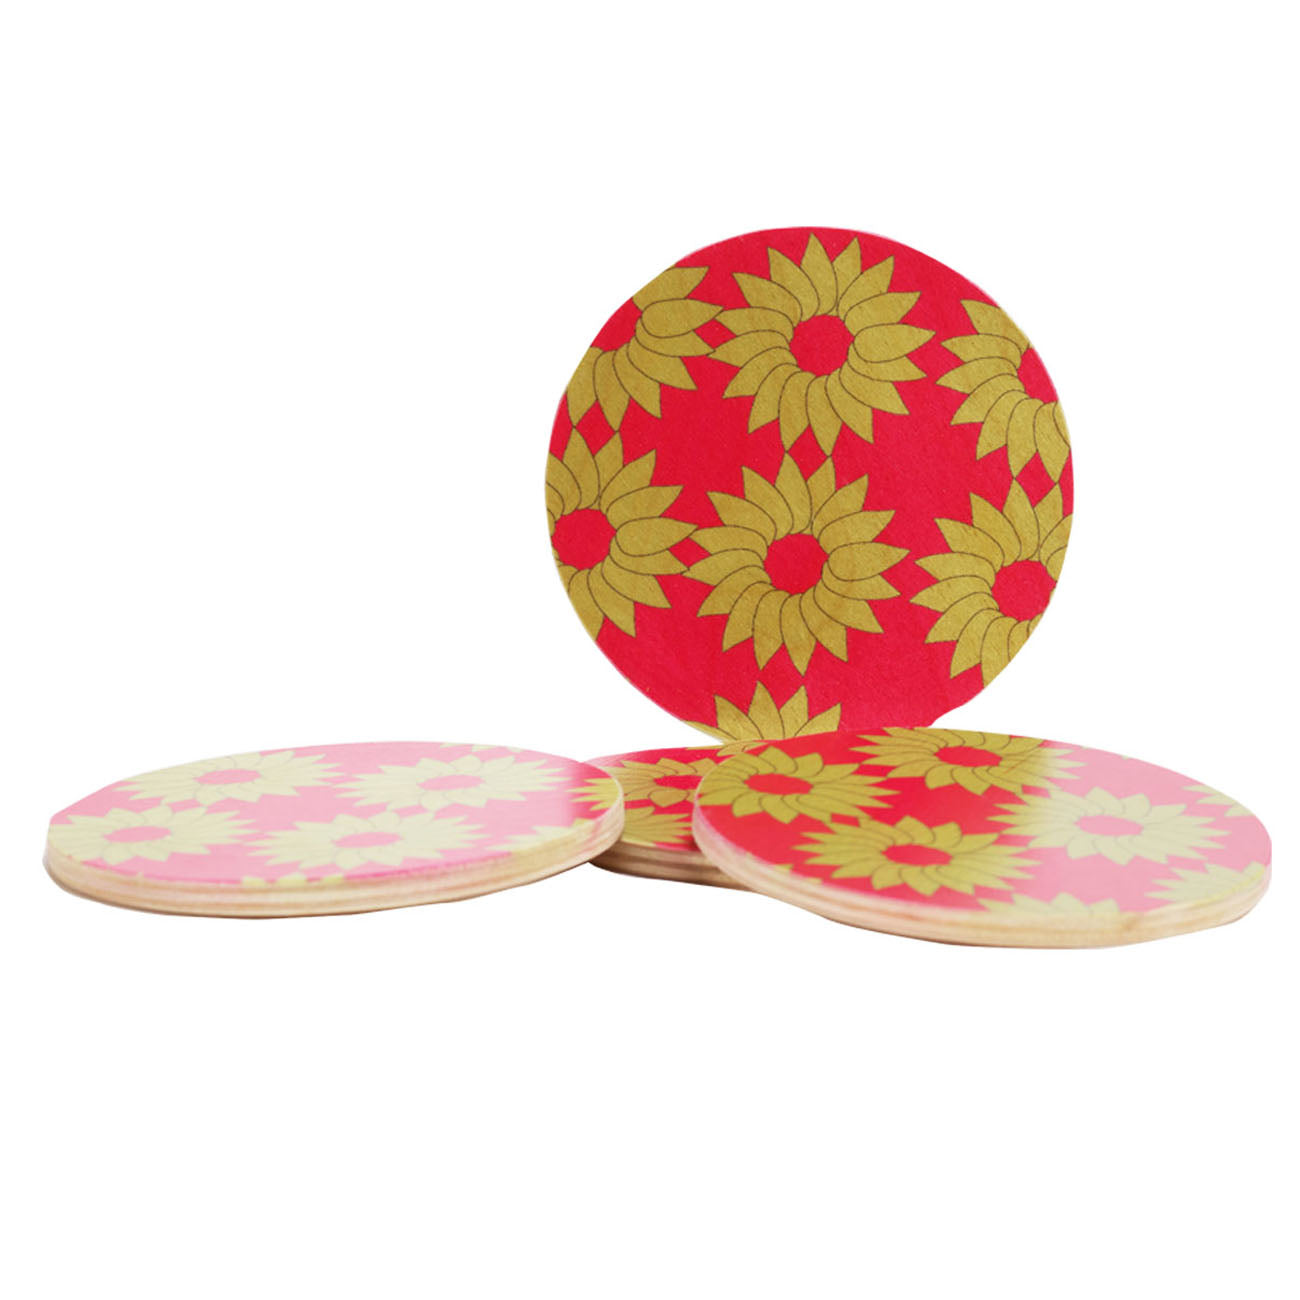 hot pink daisy coasters, set of four